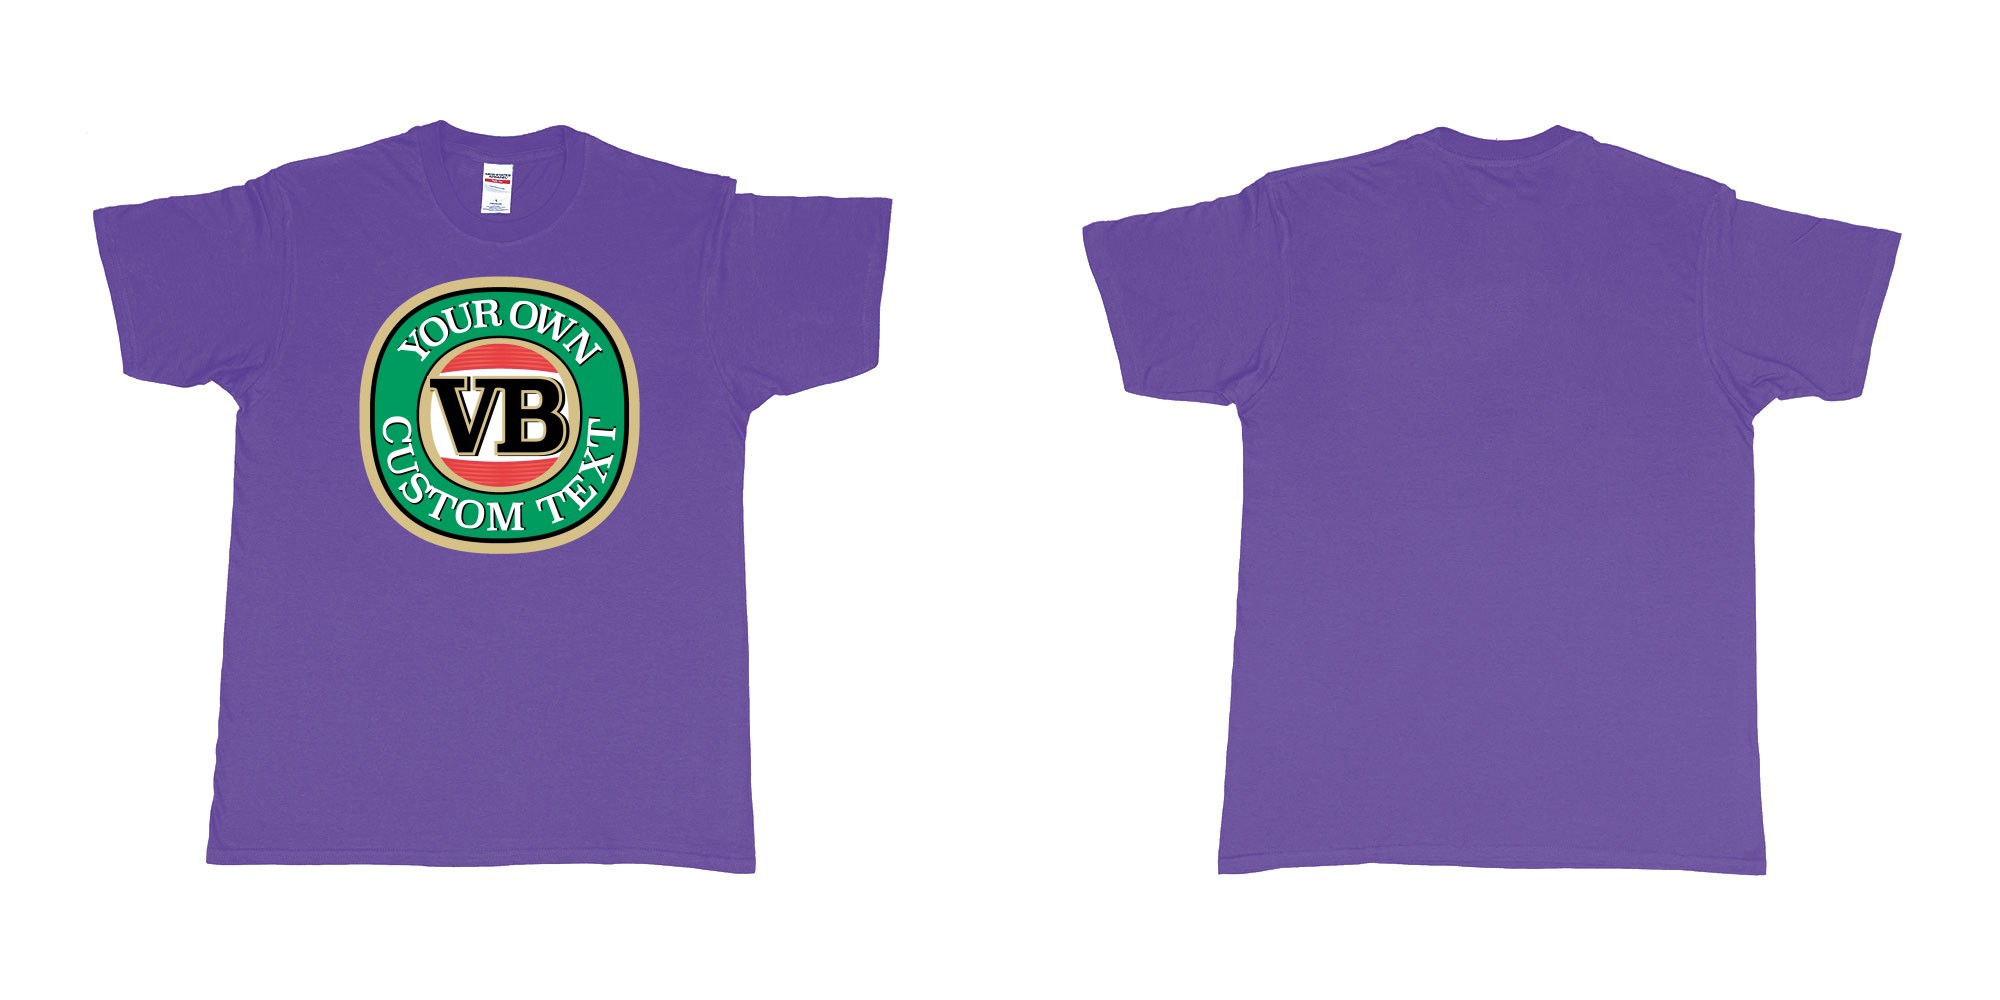 Custom tshirt design vb victoria bitter beer brand logo in fabric color purple choice your own text made in Bali by The Pirate Way